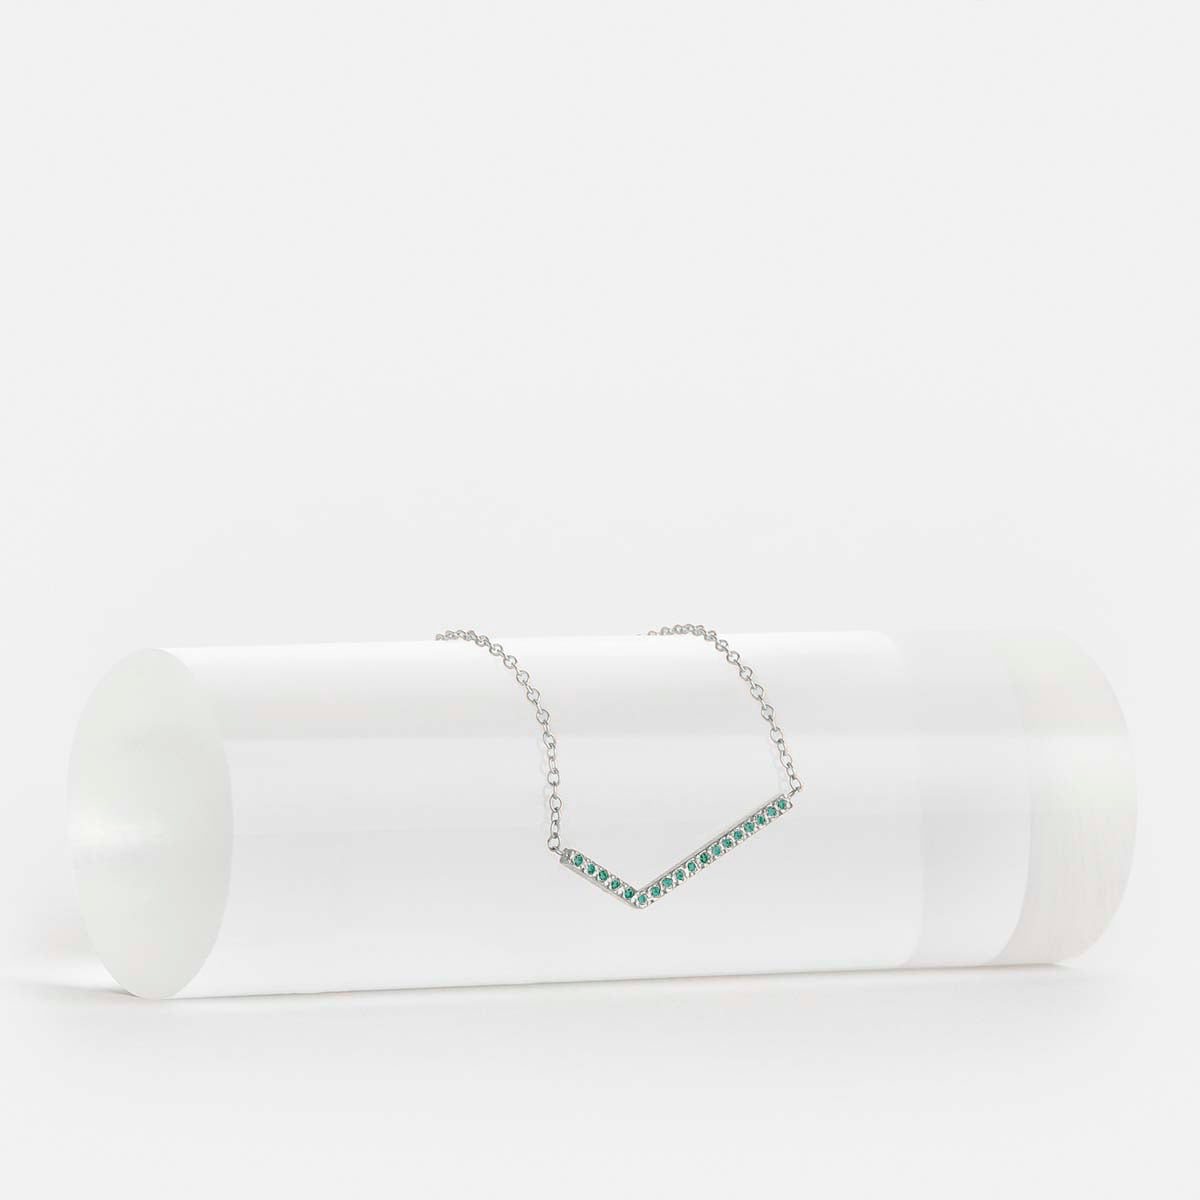 Veva Non-Traditional Necklace in 14k White Gold set with Emeralds By SHW Fine Jewelry New York City